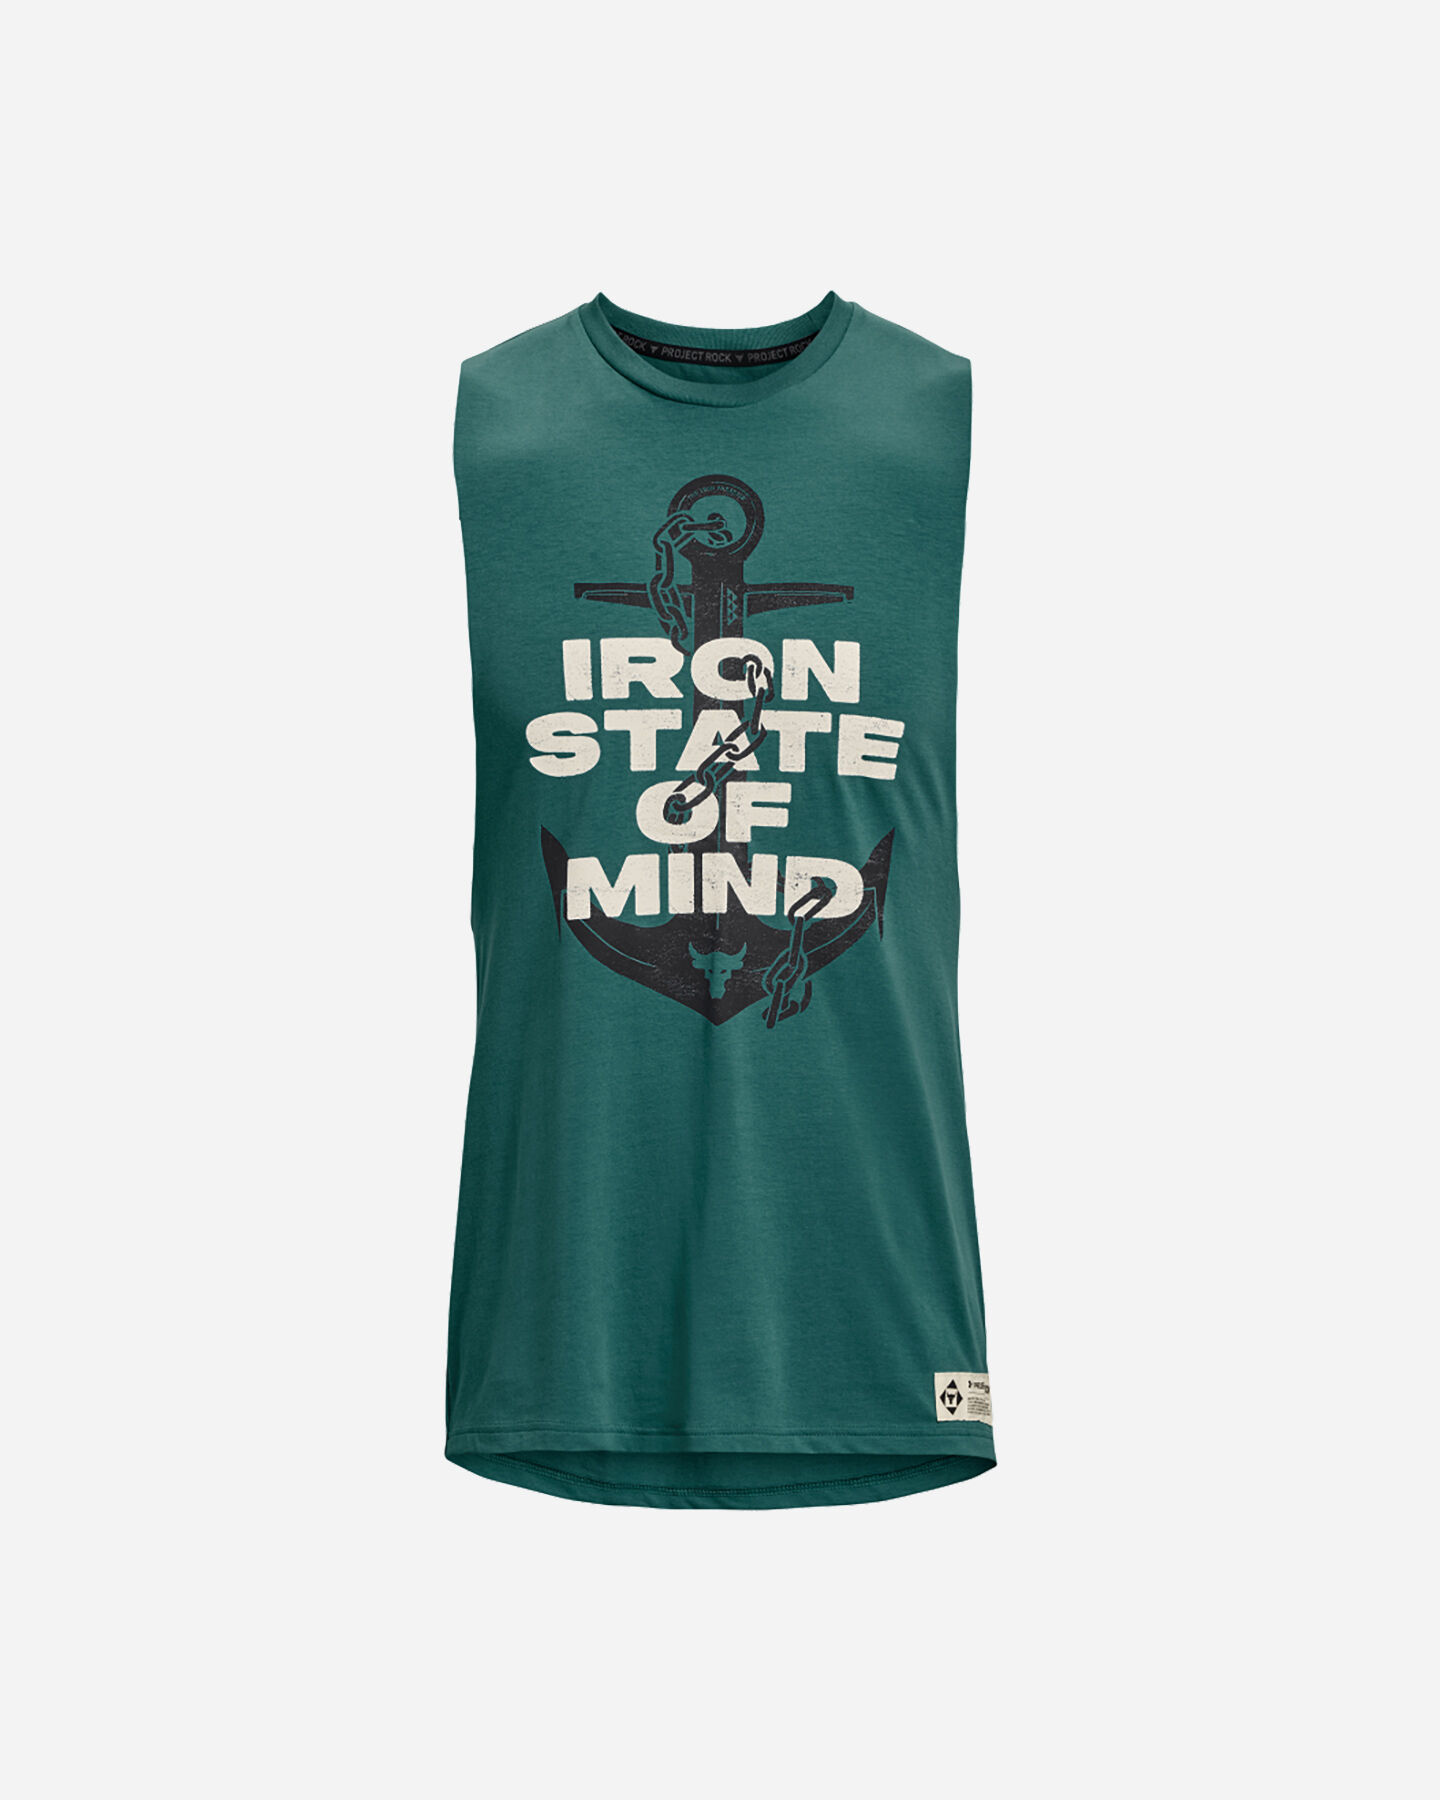  Canotta UNDER ARMOUR THE ROCK IRON STATE M S5528624|0722|XS scatto 0